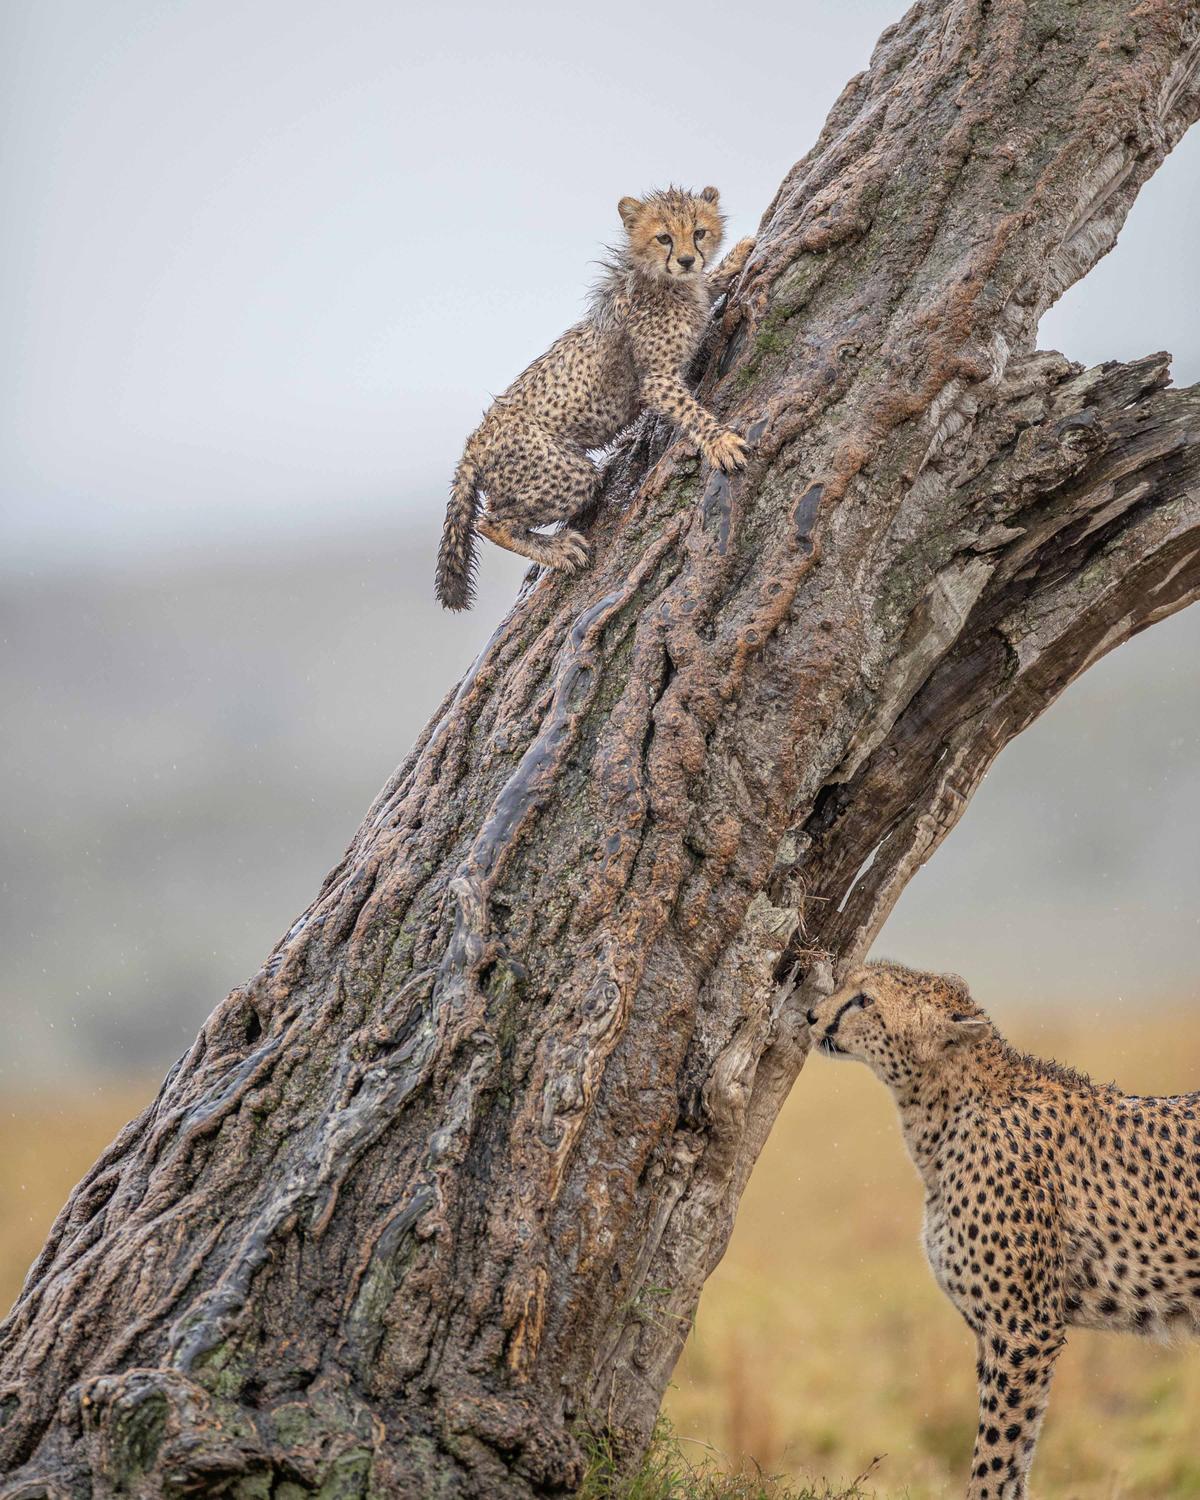 A cheetah cub climbs a tree next to an adult big cat of the same species. (SWNS)